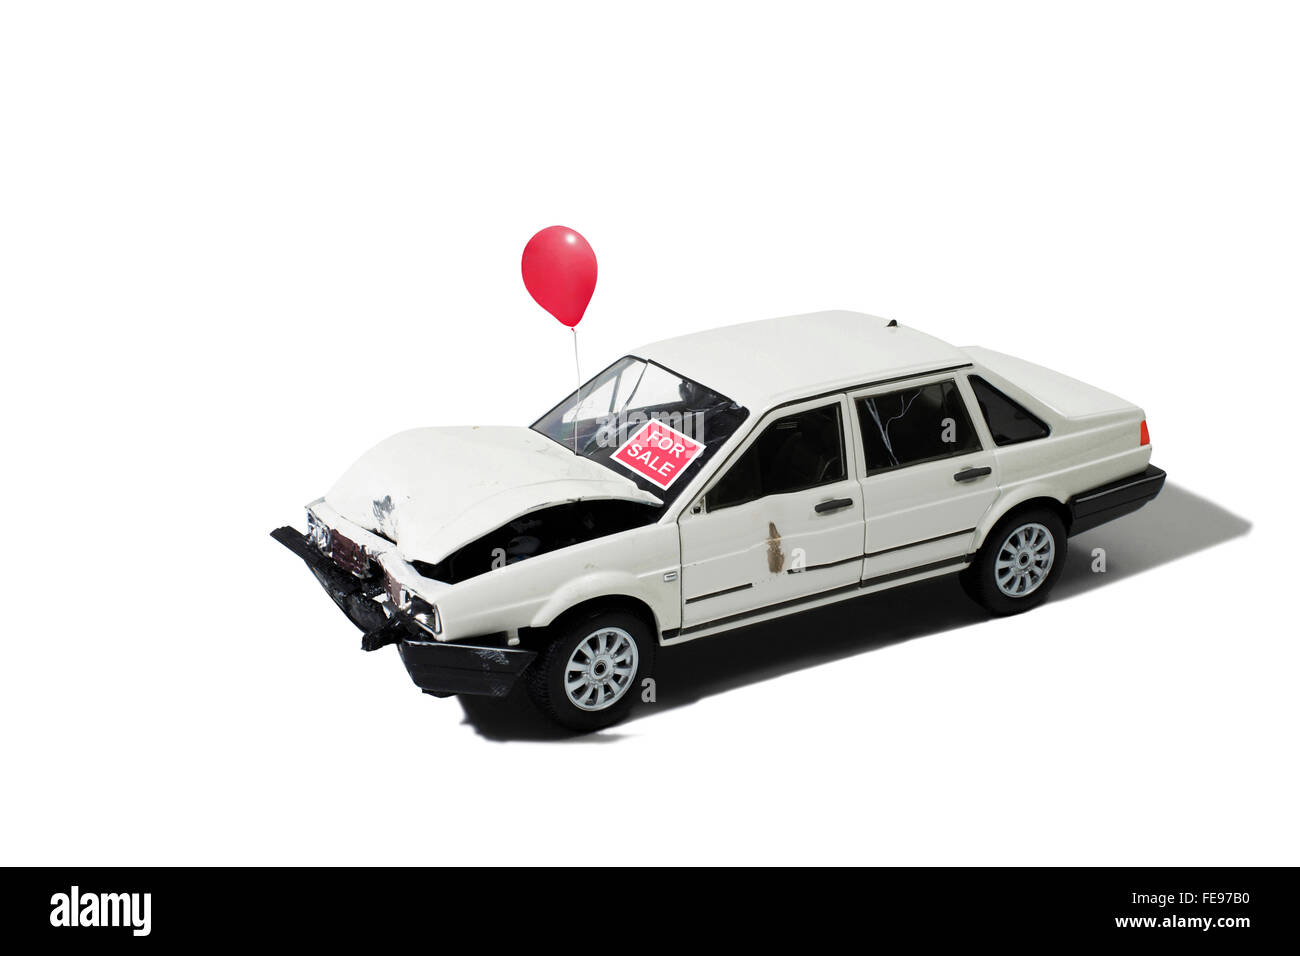 Wrecked Automobile for Sale with Balloon on a White Background Stock Photo